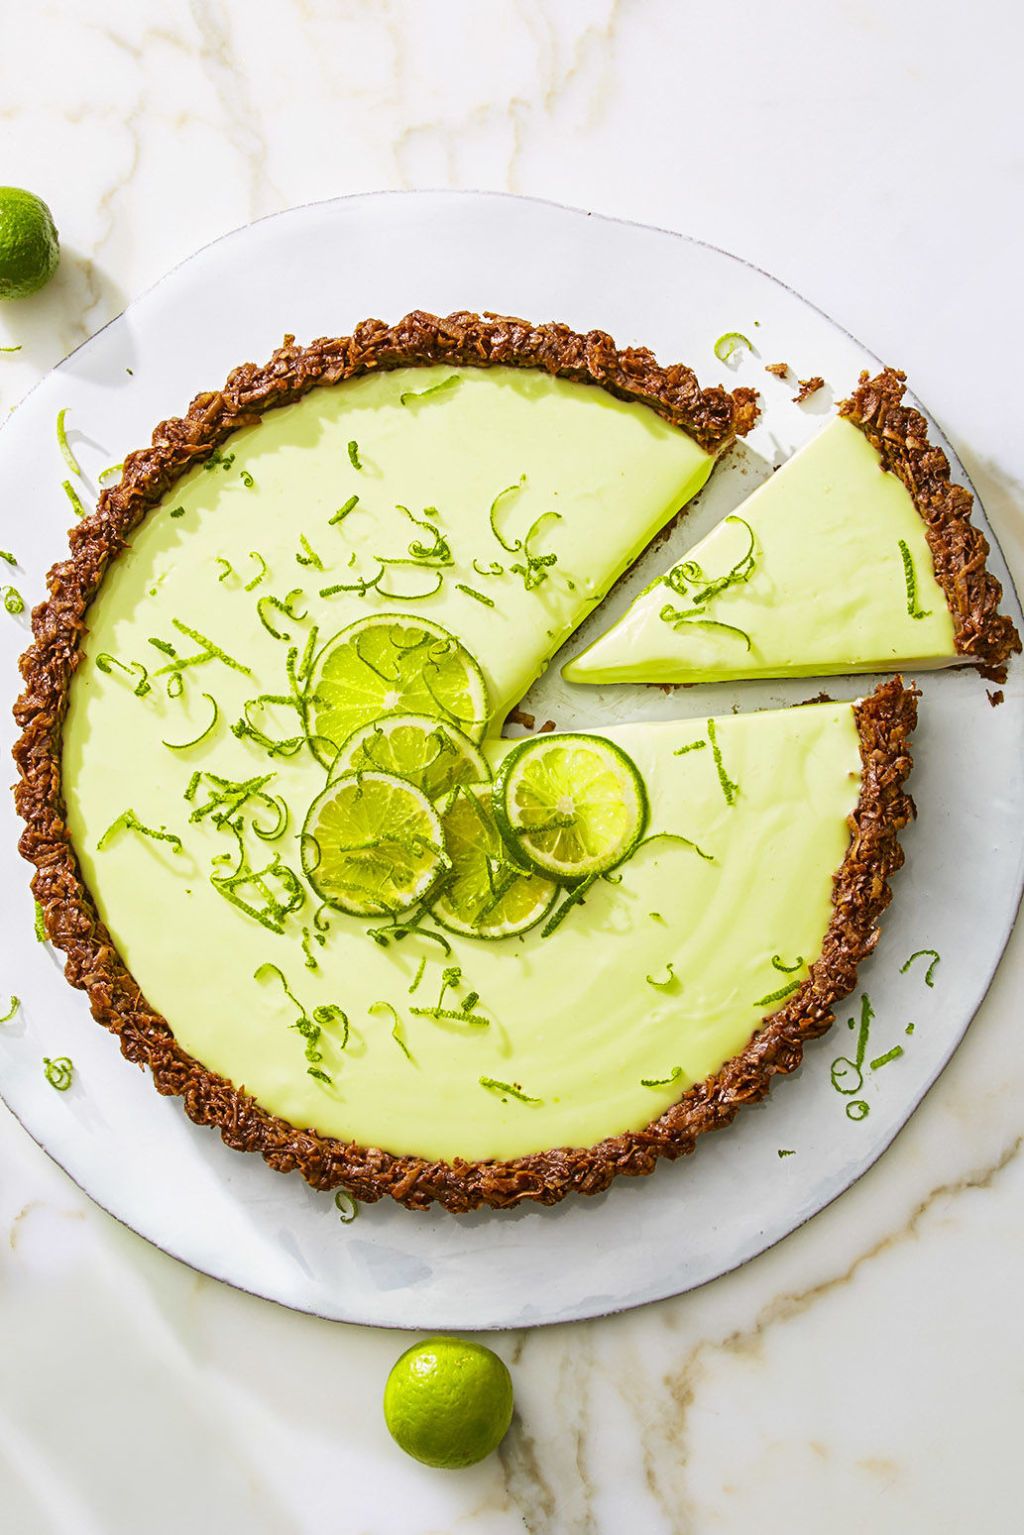 Cocoa-Nutty Lime Tart | Delicious St. Patrick's Day Recipes | Desserts & Treats